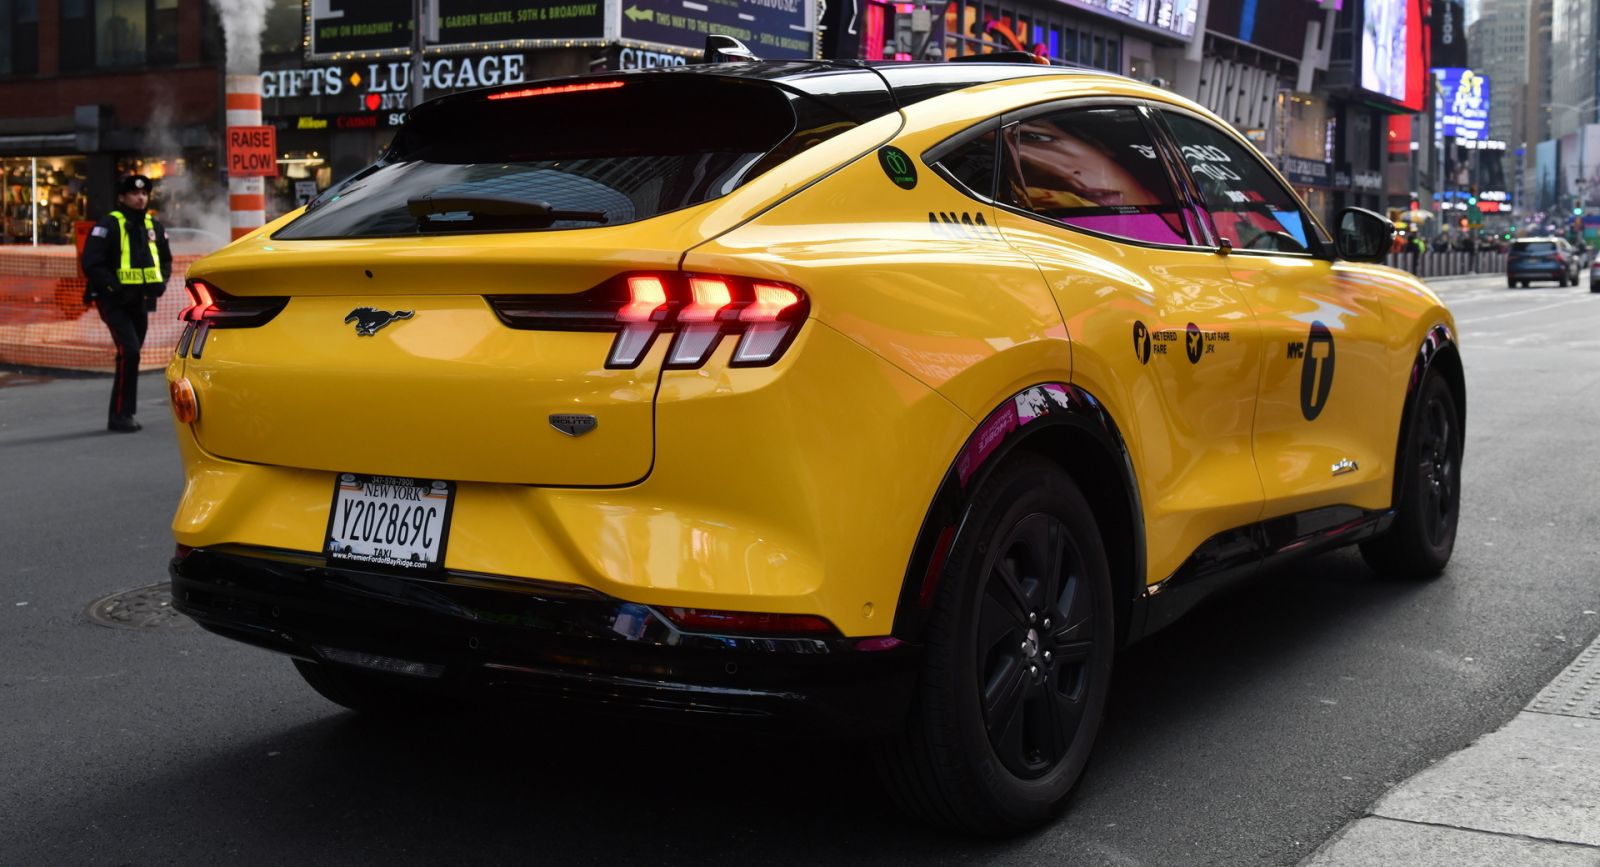 Ford Mustang Mach-E Yellow Cab